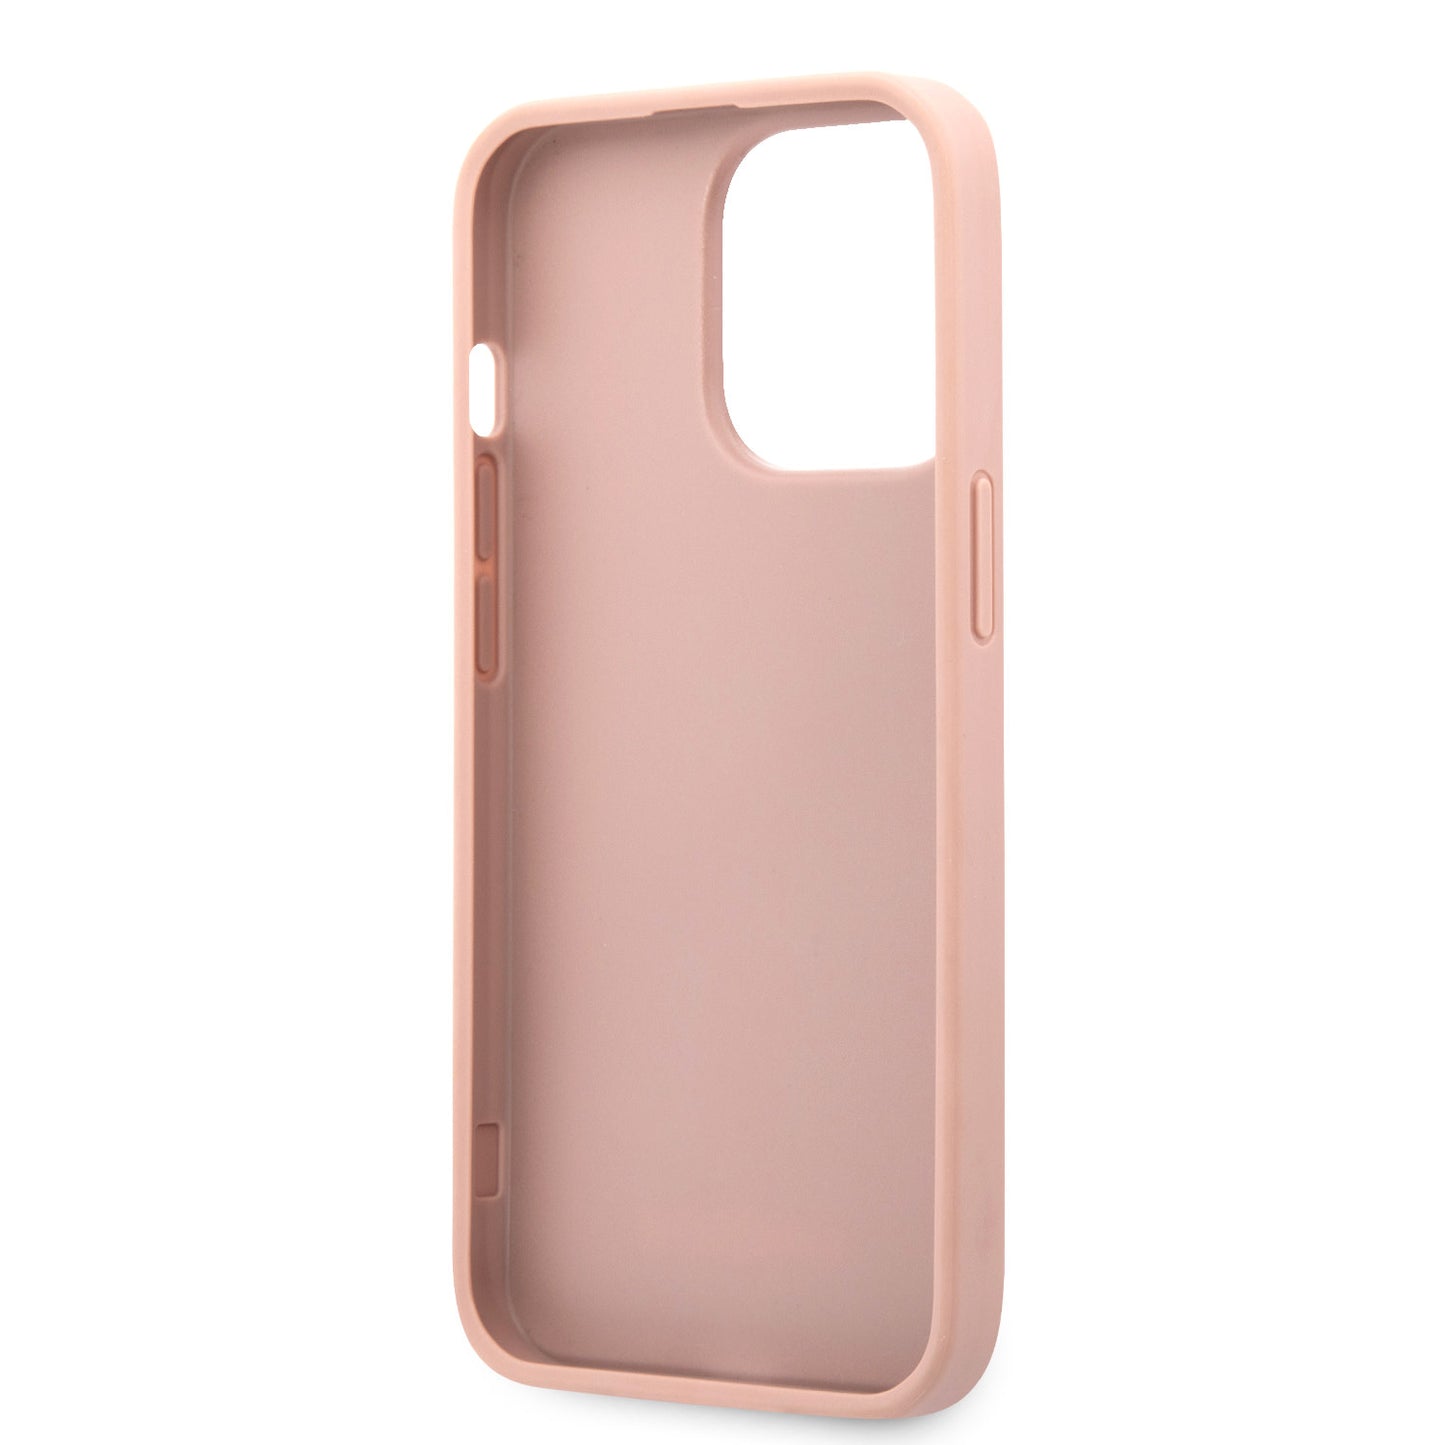 Guess iPhone 13 PRO MAX Backcover - Zilver 4G Logo - Saffiano PU - Roze